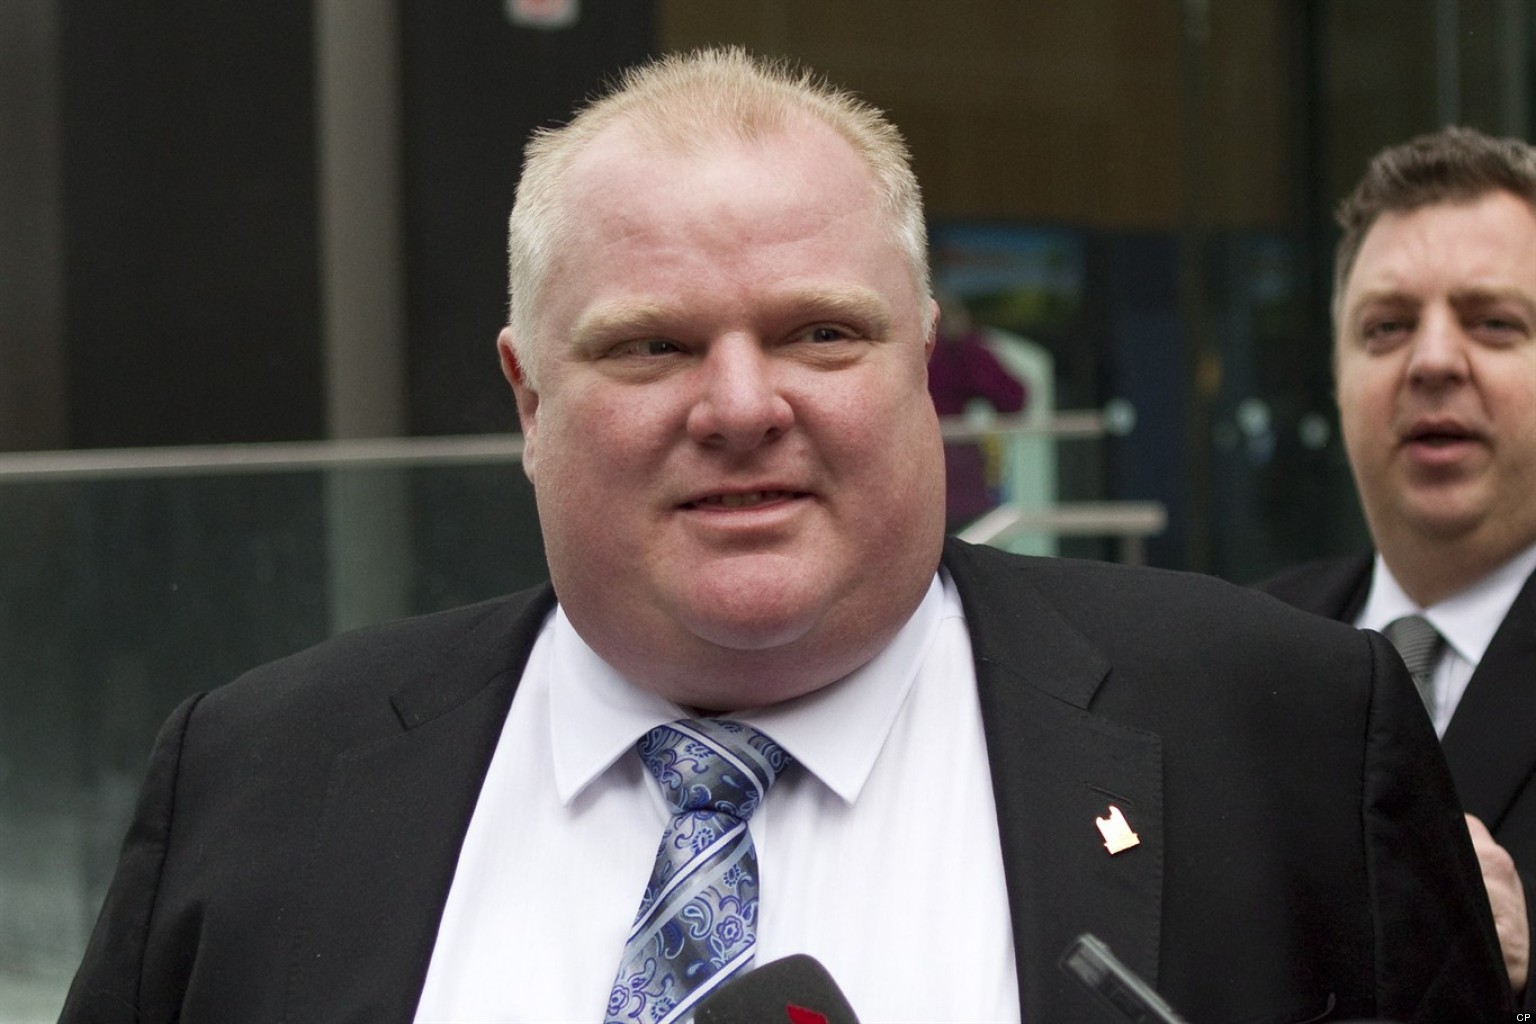 Rob ford campaign finance audit #10